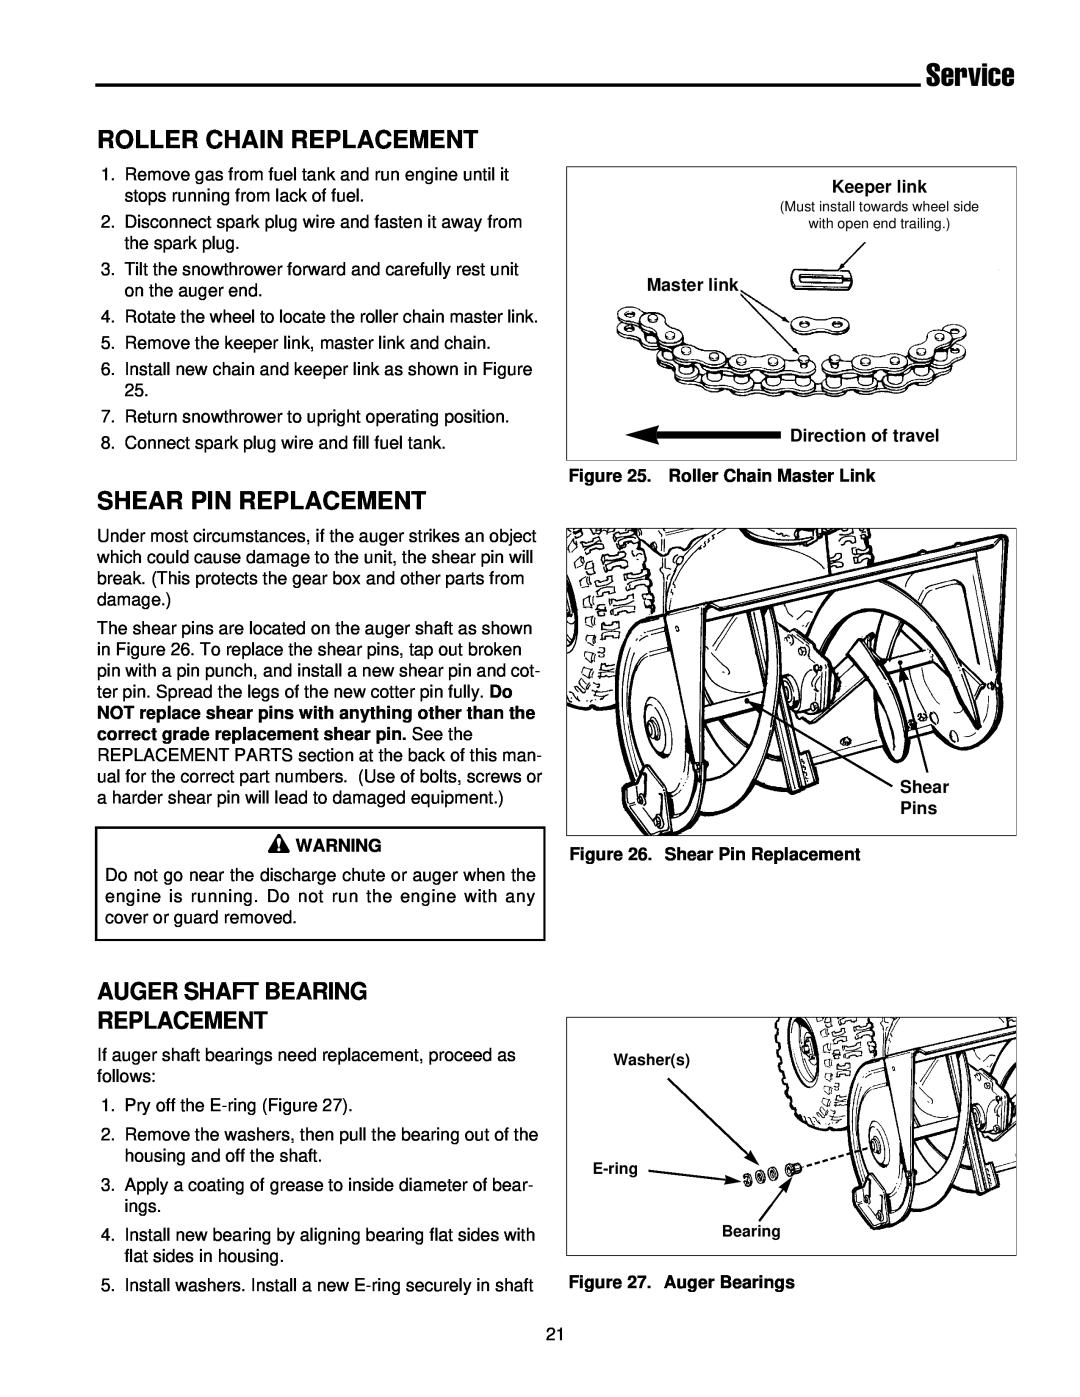 Simplicity 1693425 555M manual Roller Chain Replacement, Shear Pin Replacement, Auger Shaft Bearing Replacement, Service 